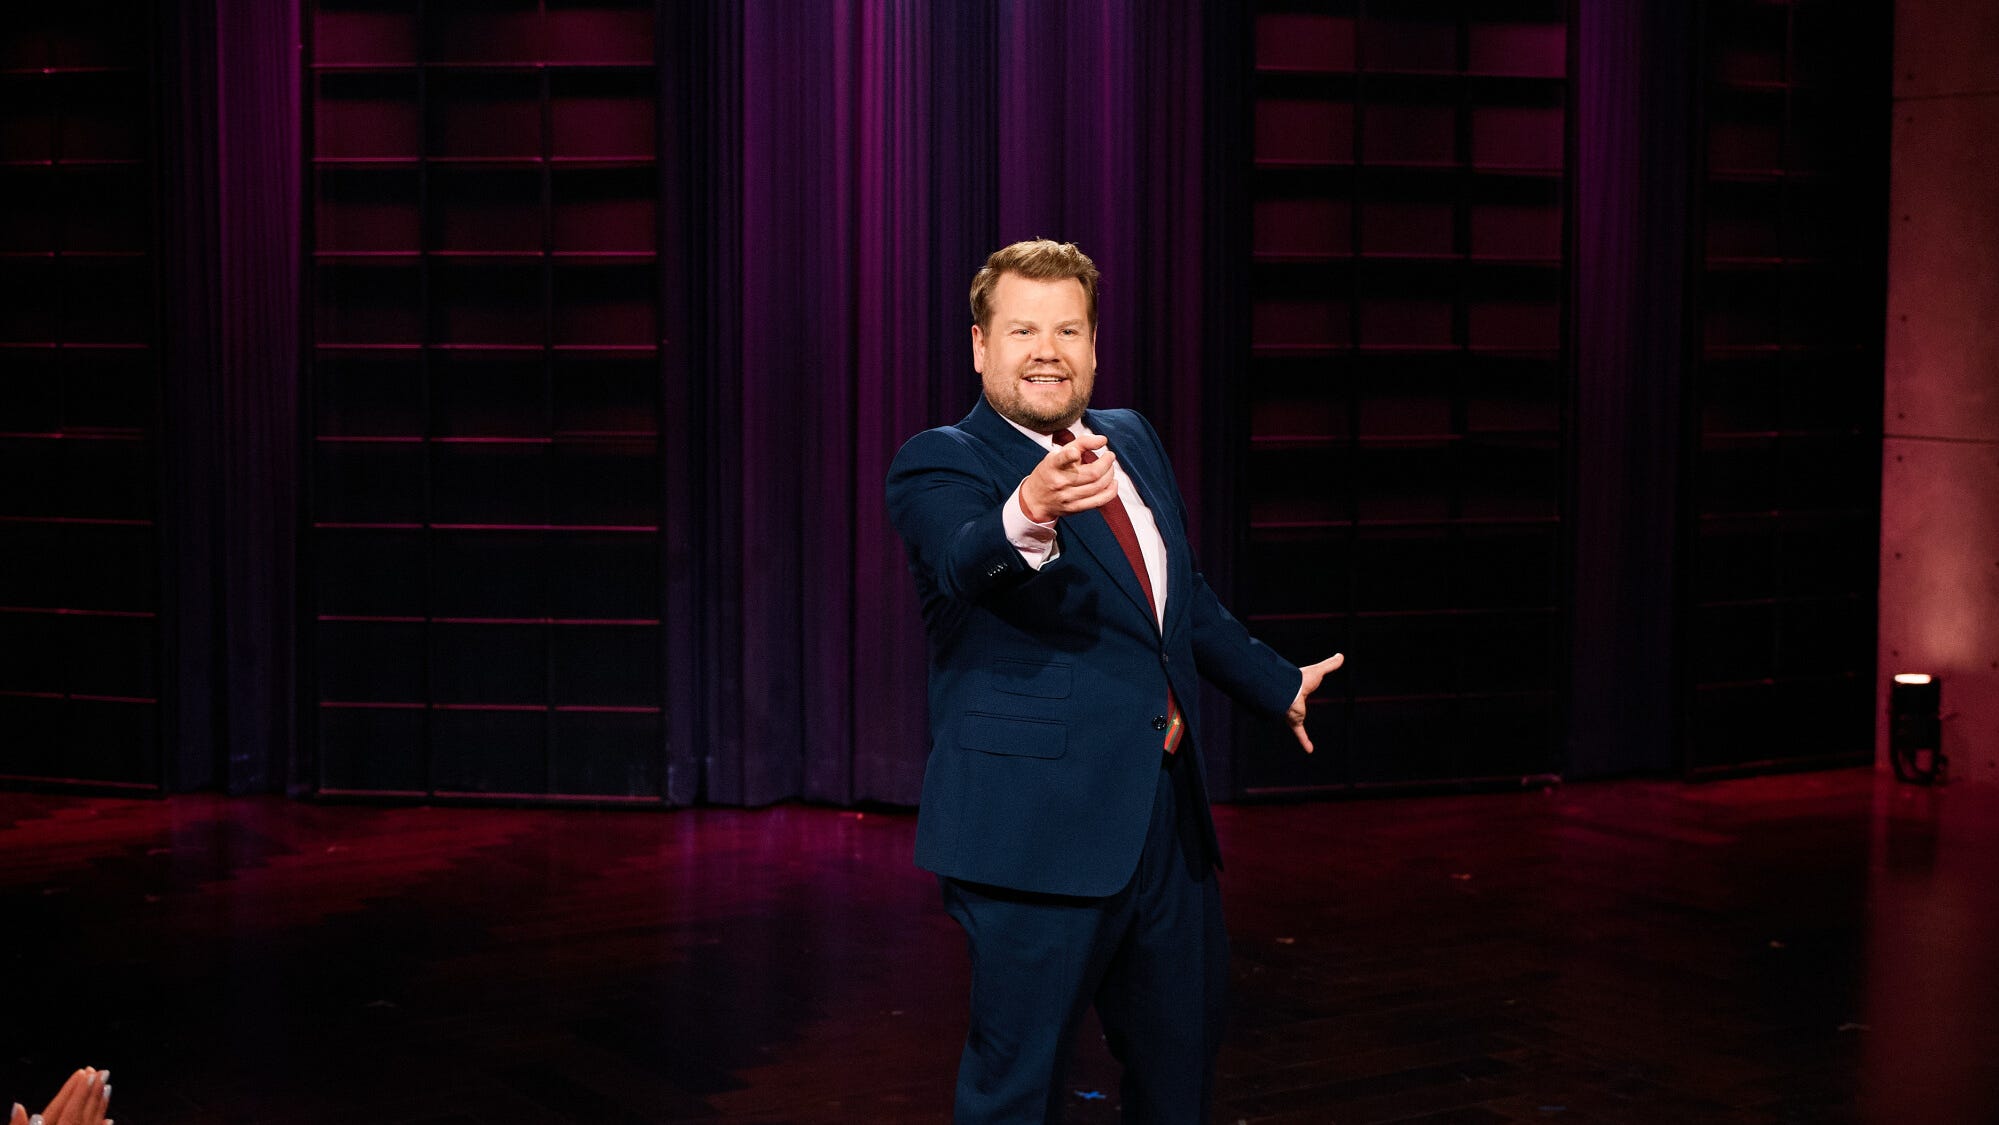 James Corden during his last week of "Late Late Show" episodes.